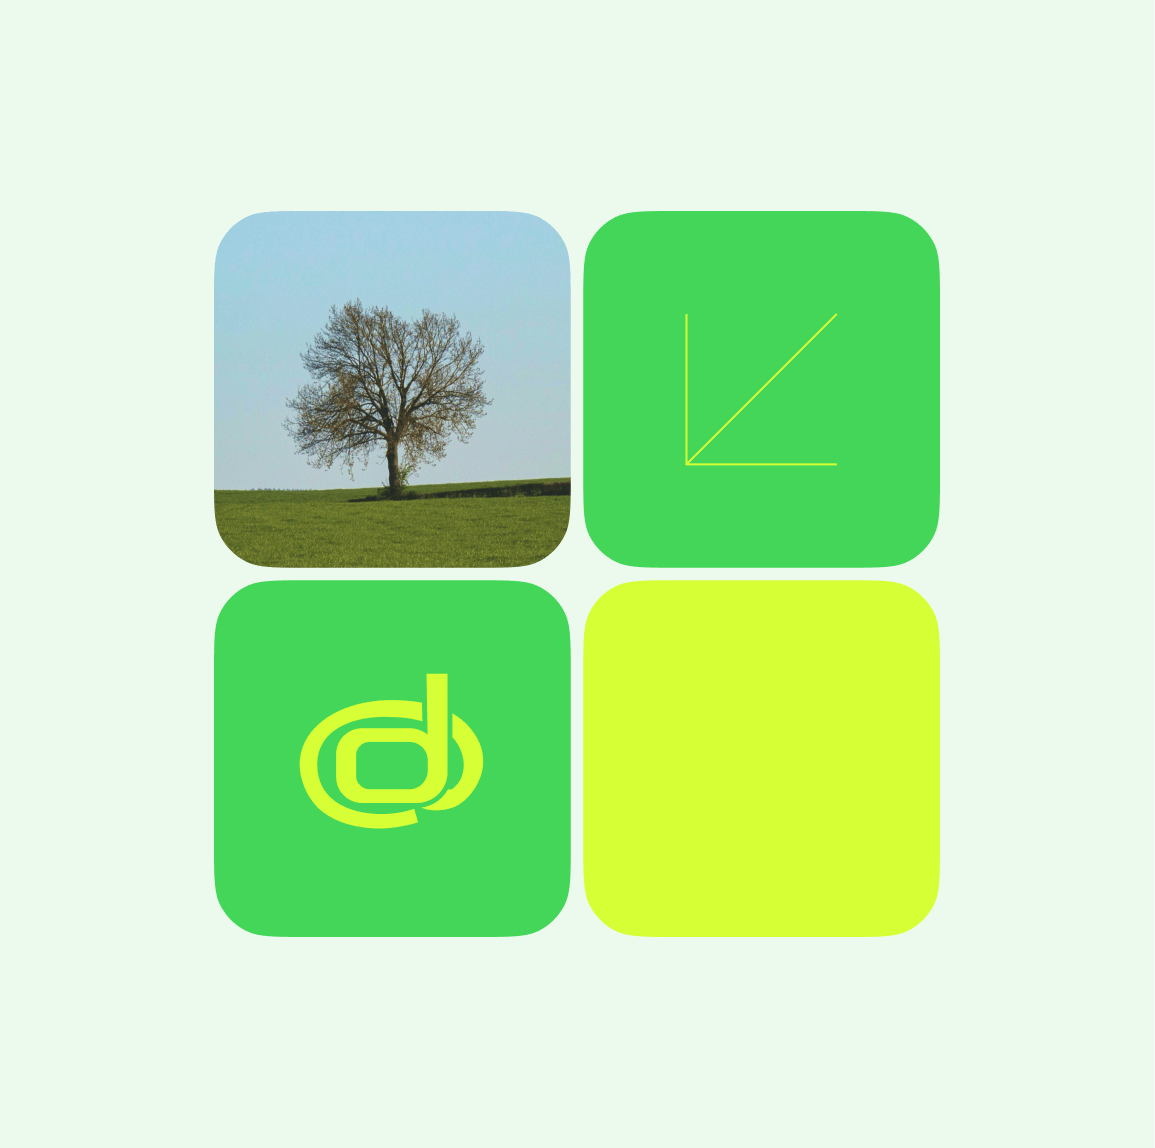 Four icons for Dmarcia in green; a tree, an downward arrow to the left, Dmarcian logo and plain neon green box